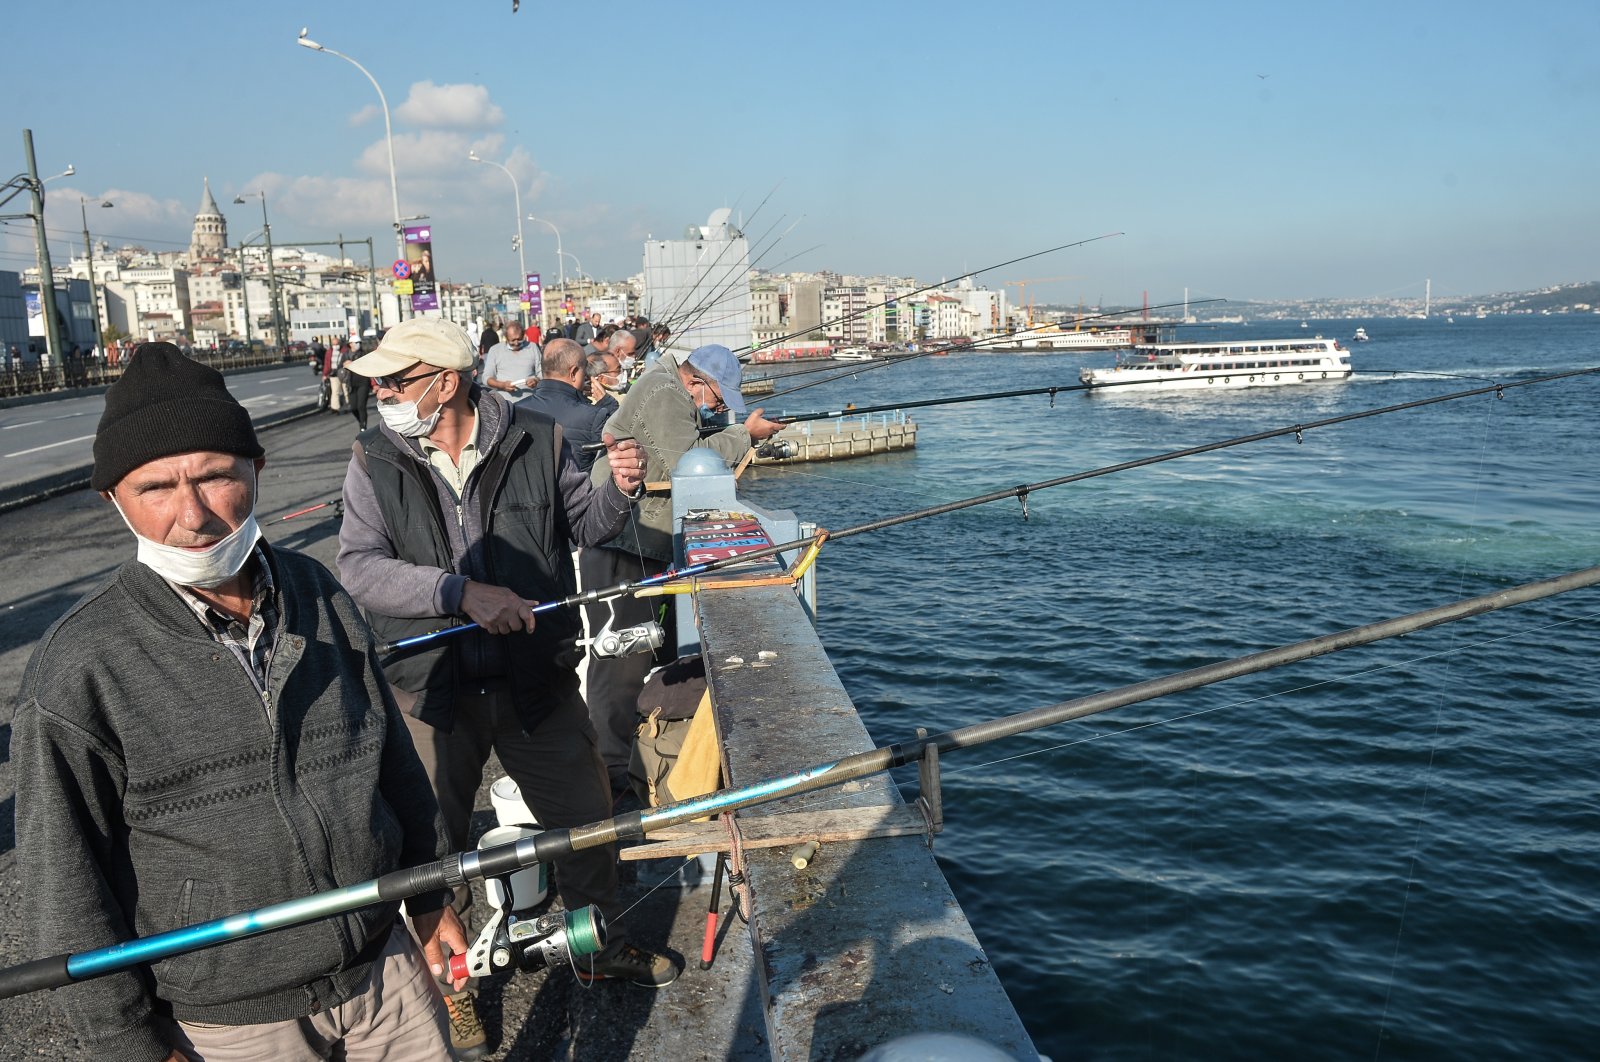 Fishermen cast their lines off Galata Bridge, some wearing masks to protect against COVID-19, in Istanbul, Turkey, Nov. 2, 2020. (DHA Photo)